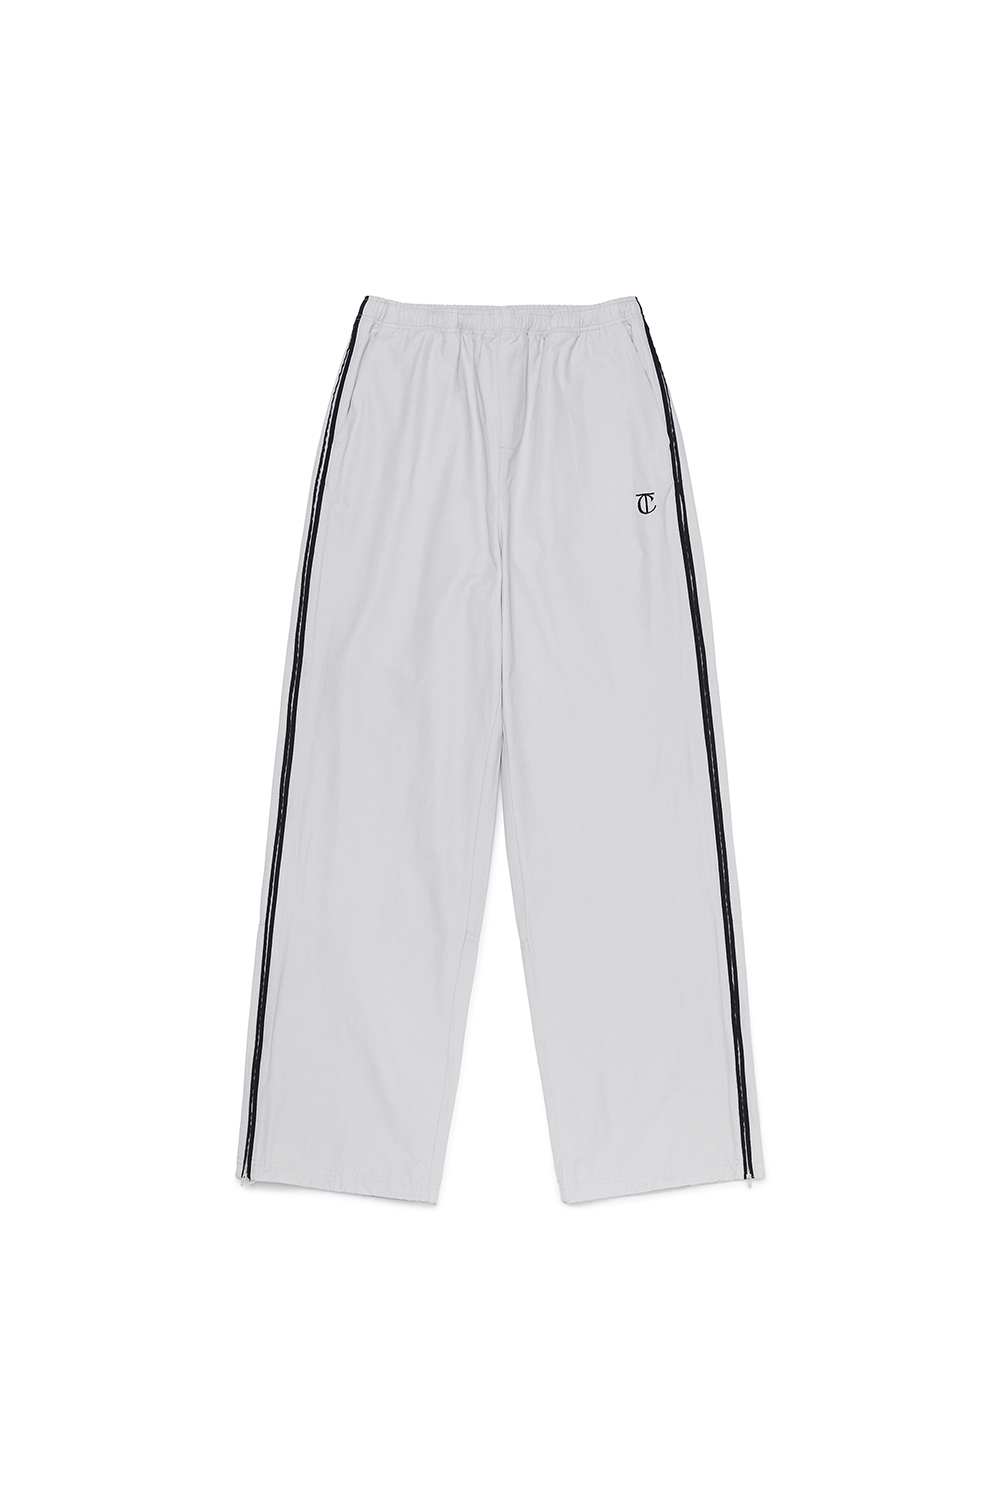 LOW RISE TRACK PANTS [GREY]		